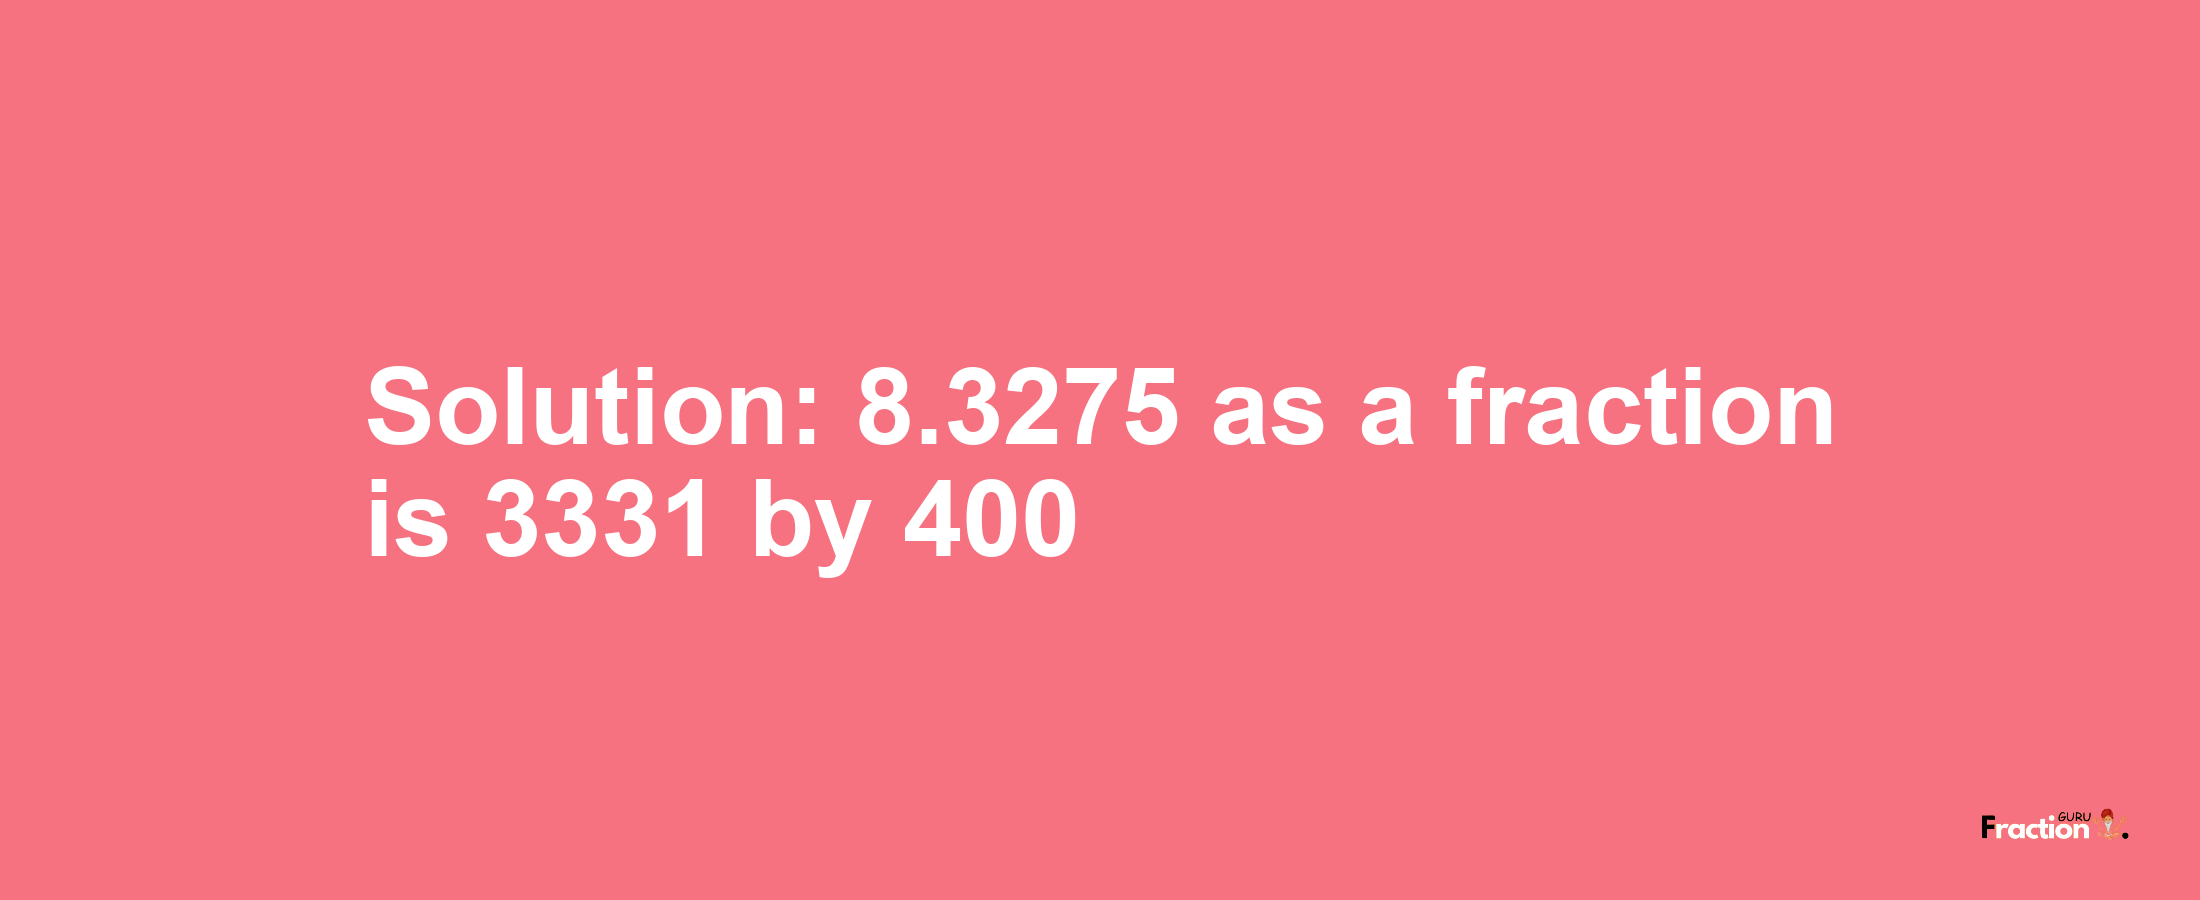 Solution:8.3275 as a fraction is 3331/400